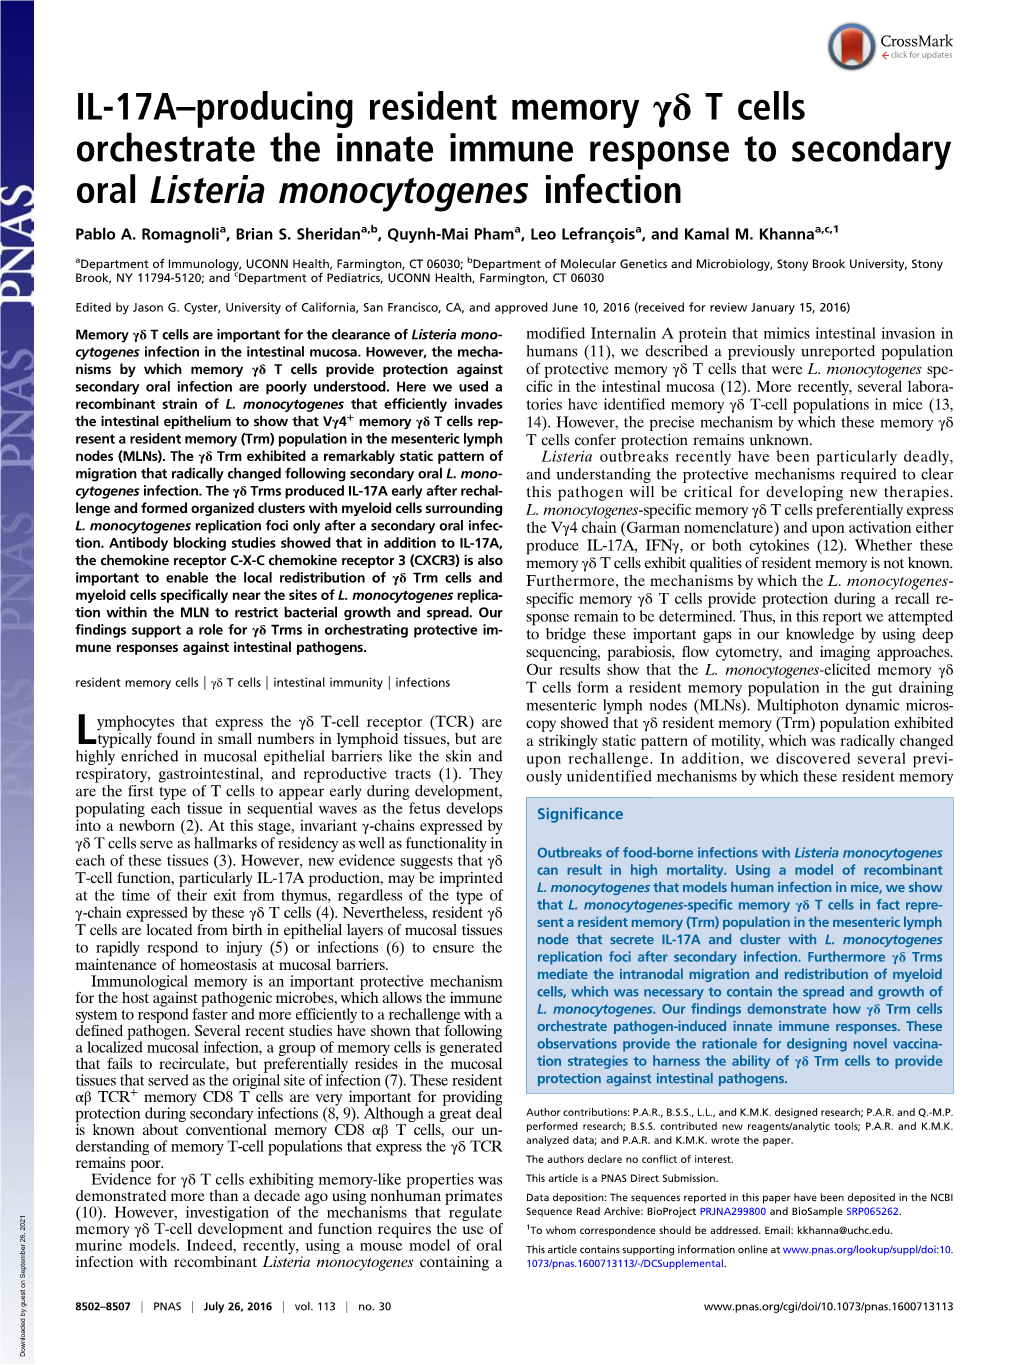 IL-17A–Producing Resident Memory Γδ T Cells Orchestrate the Innate Immune Response to Secondary Oral Listeria Monocytogenes Infection